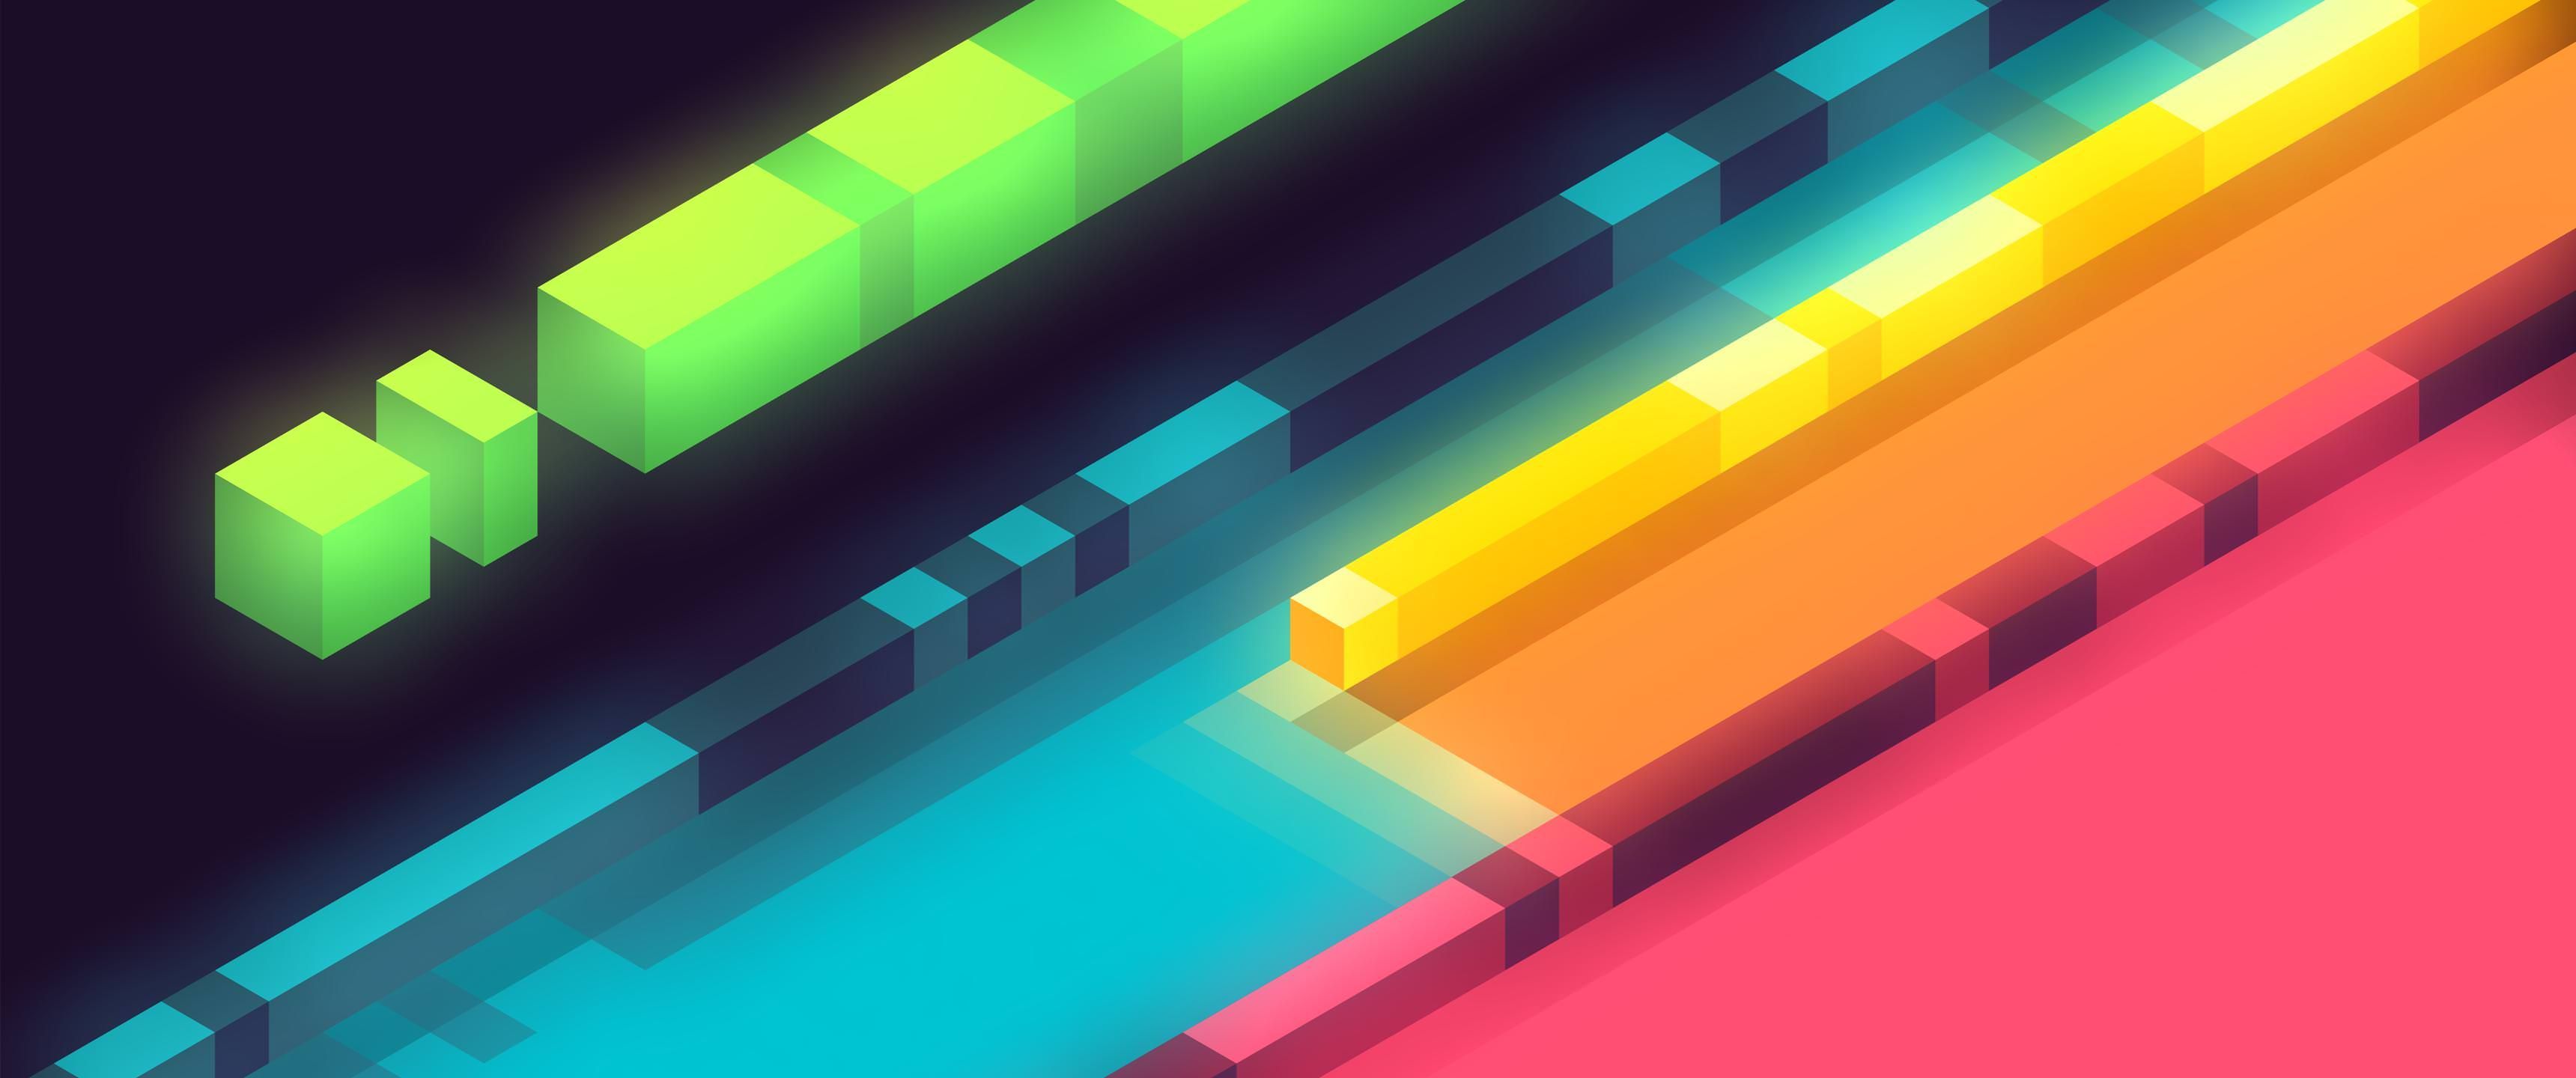 A colorful poster with neon lines - 3440x1440